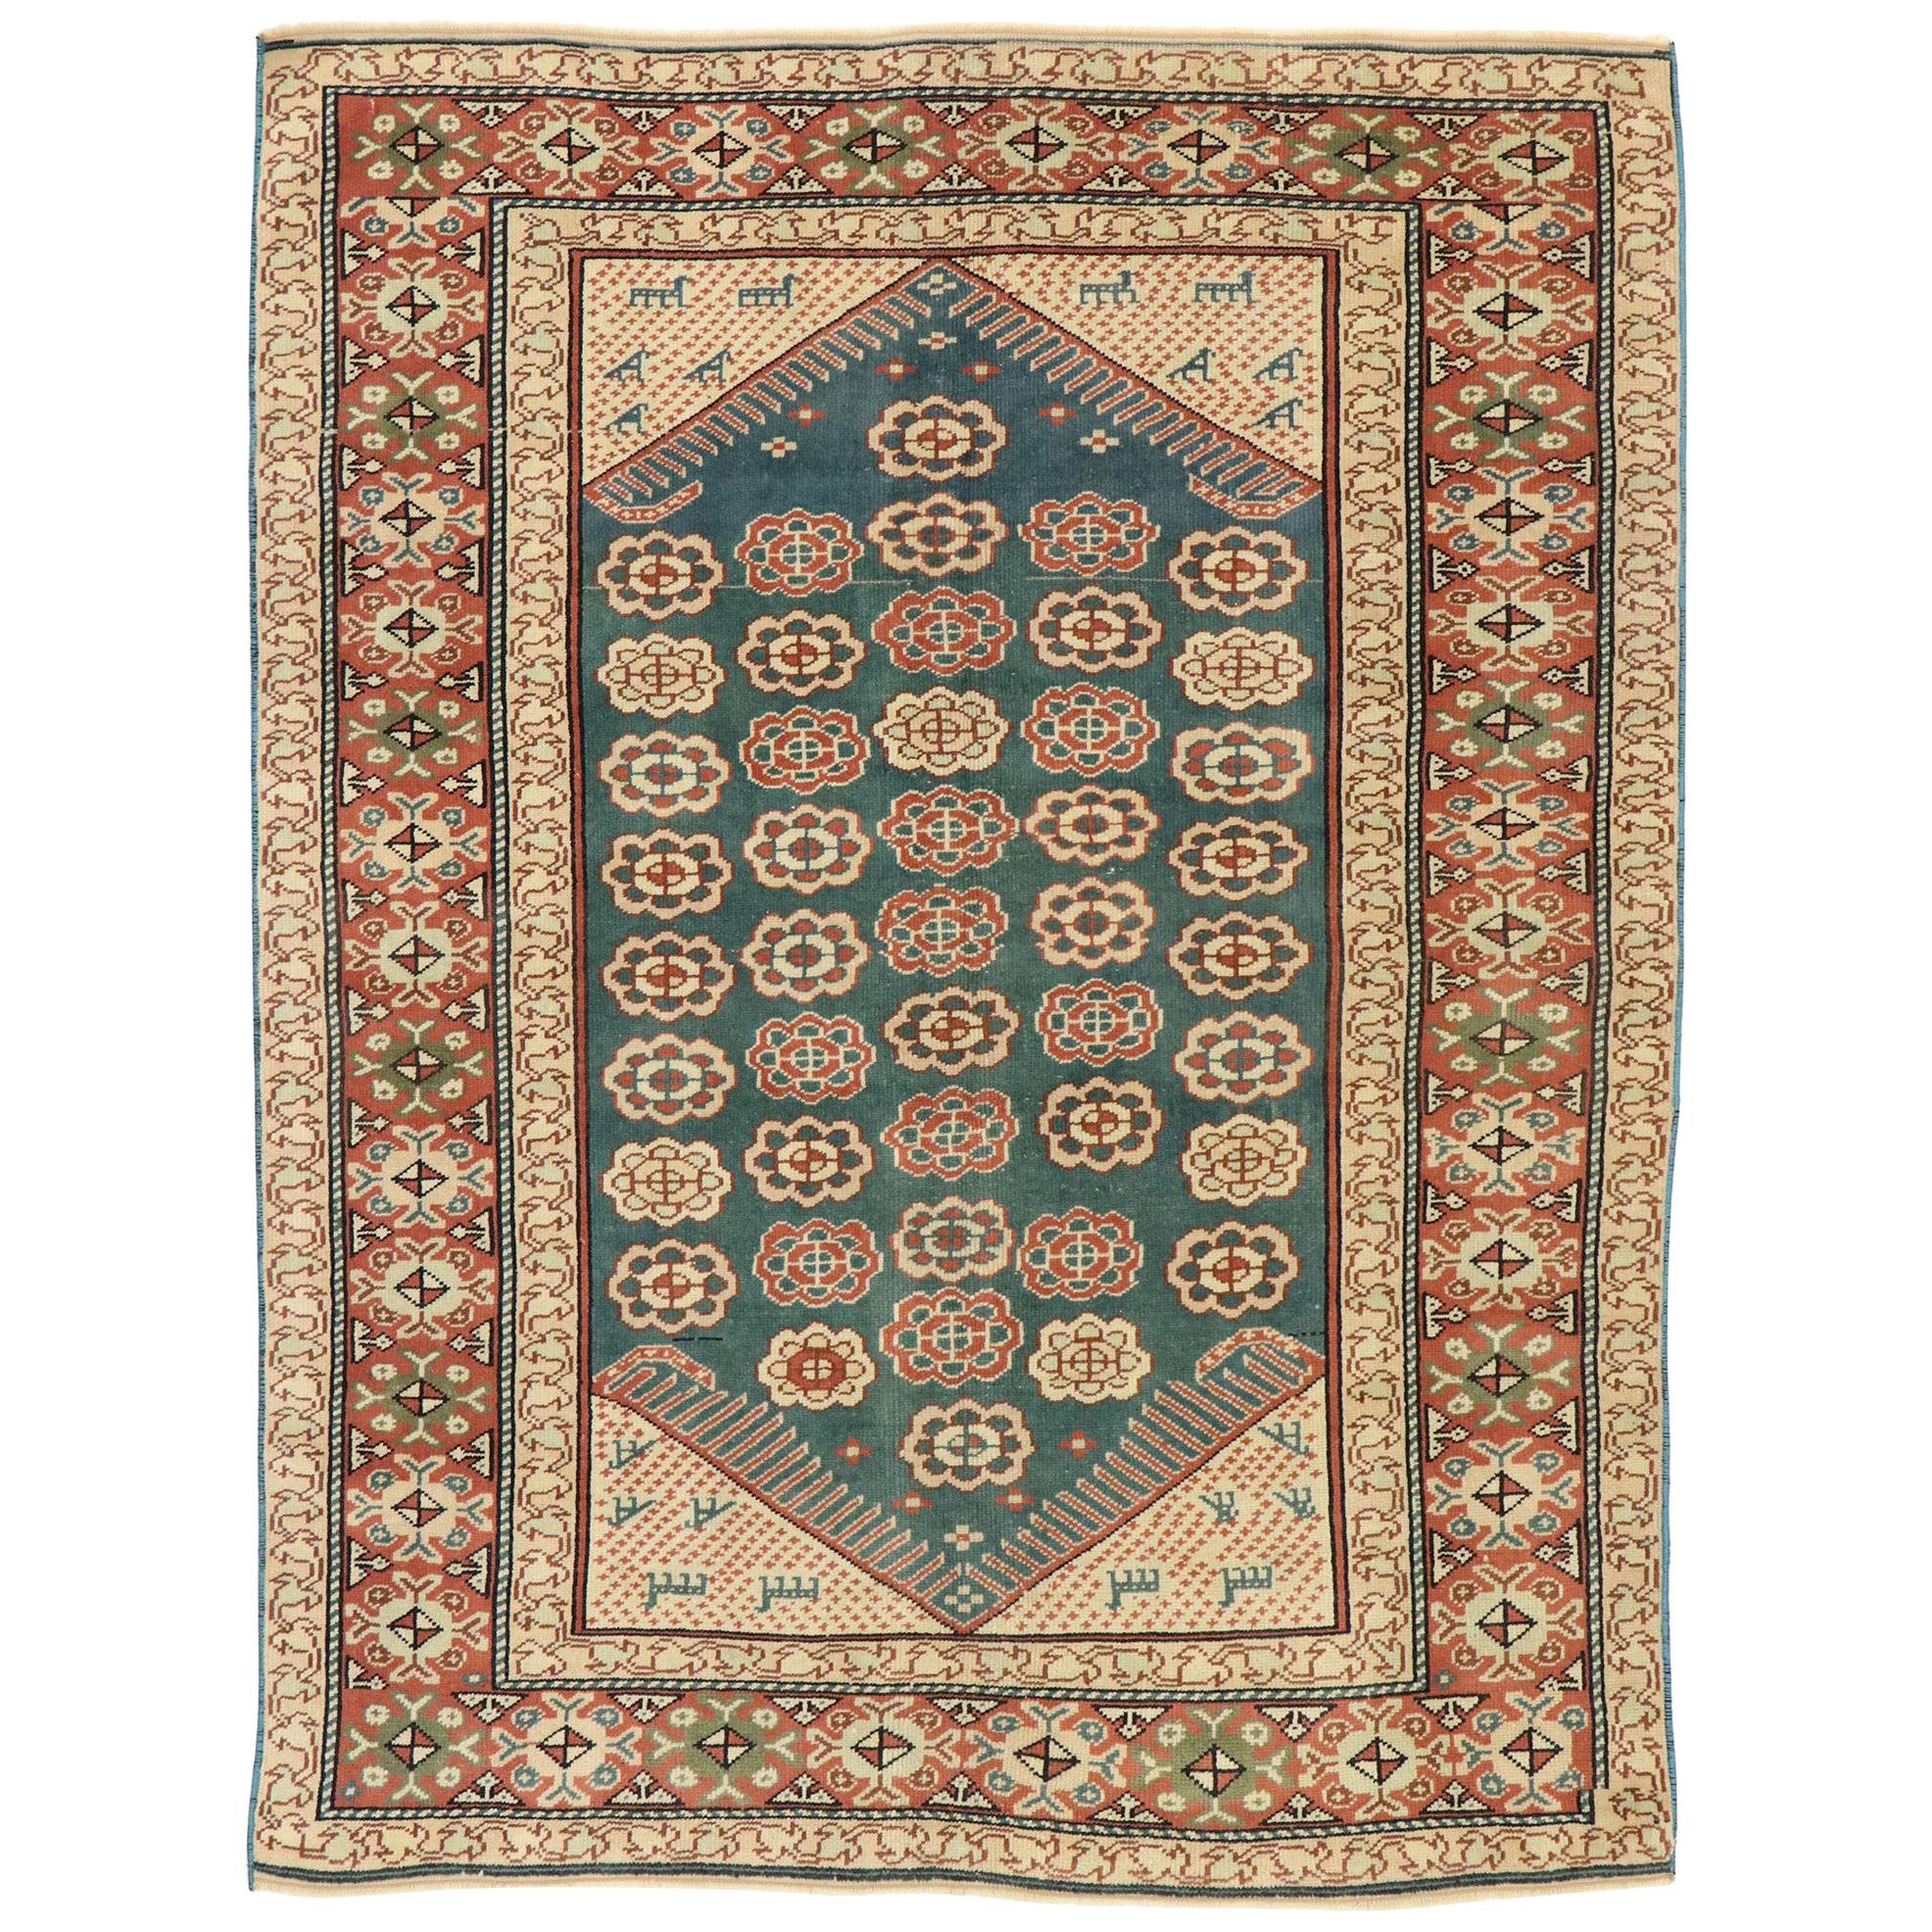 Antique Turkish Oushak Rug with American Colonial Style